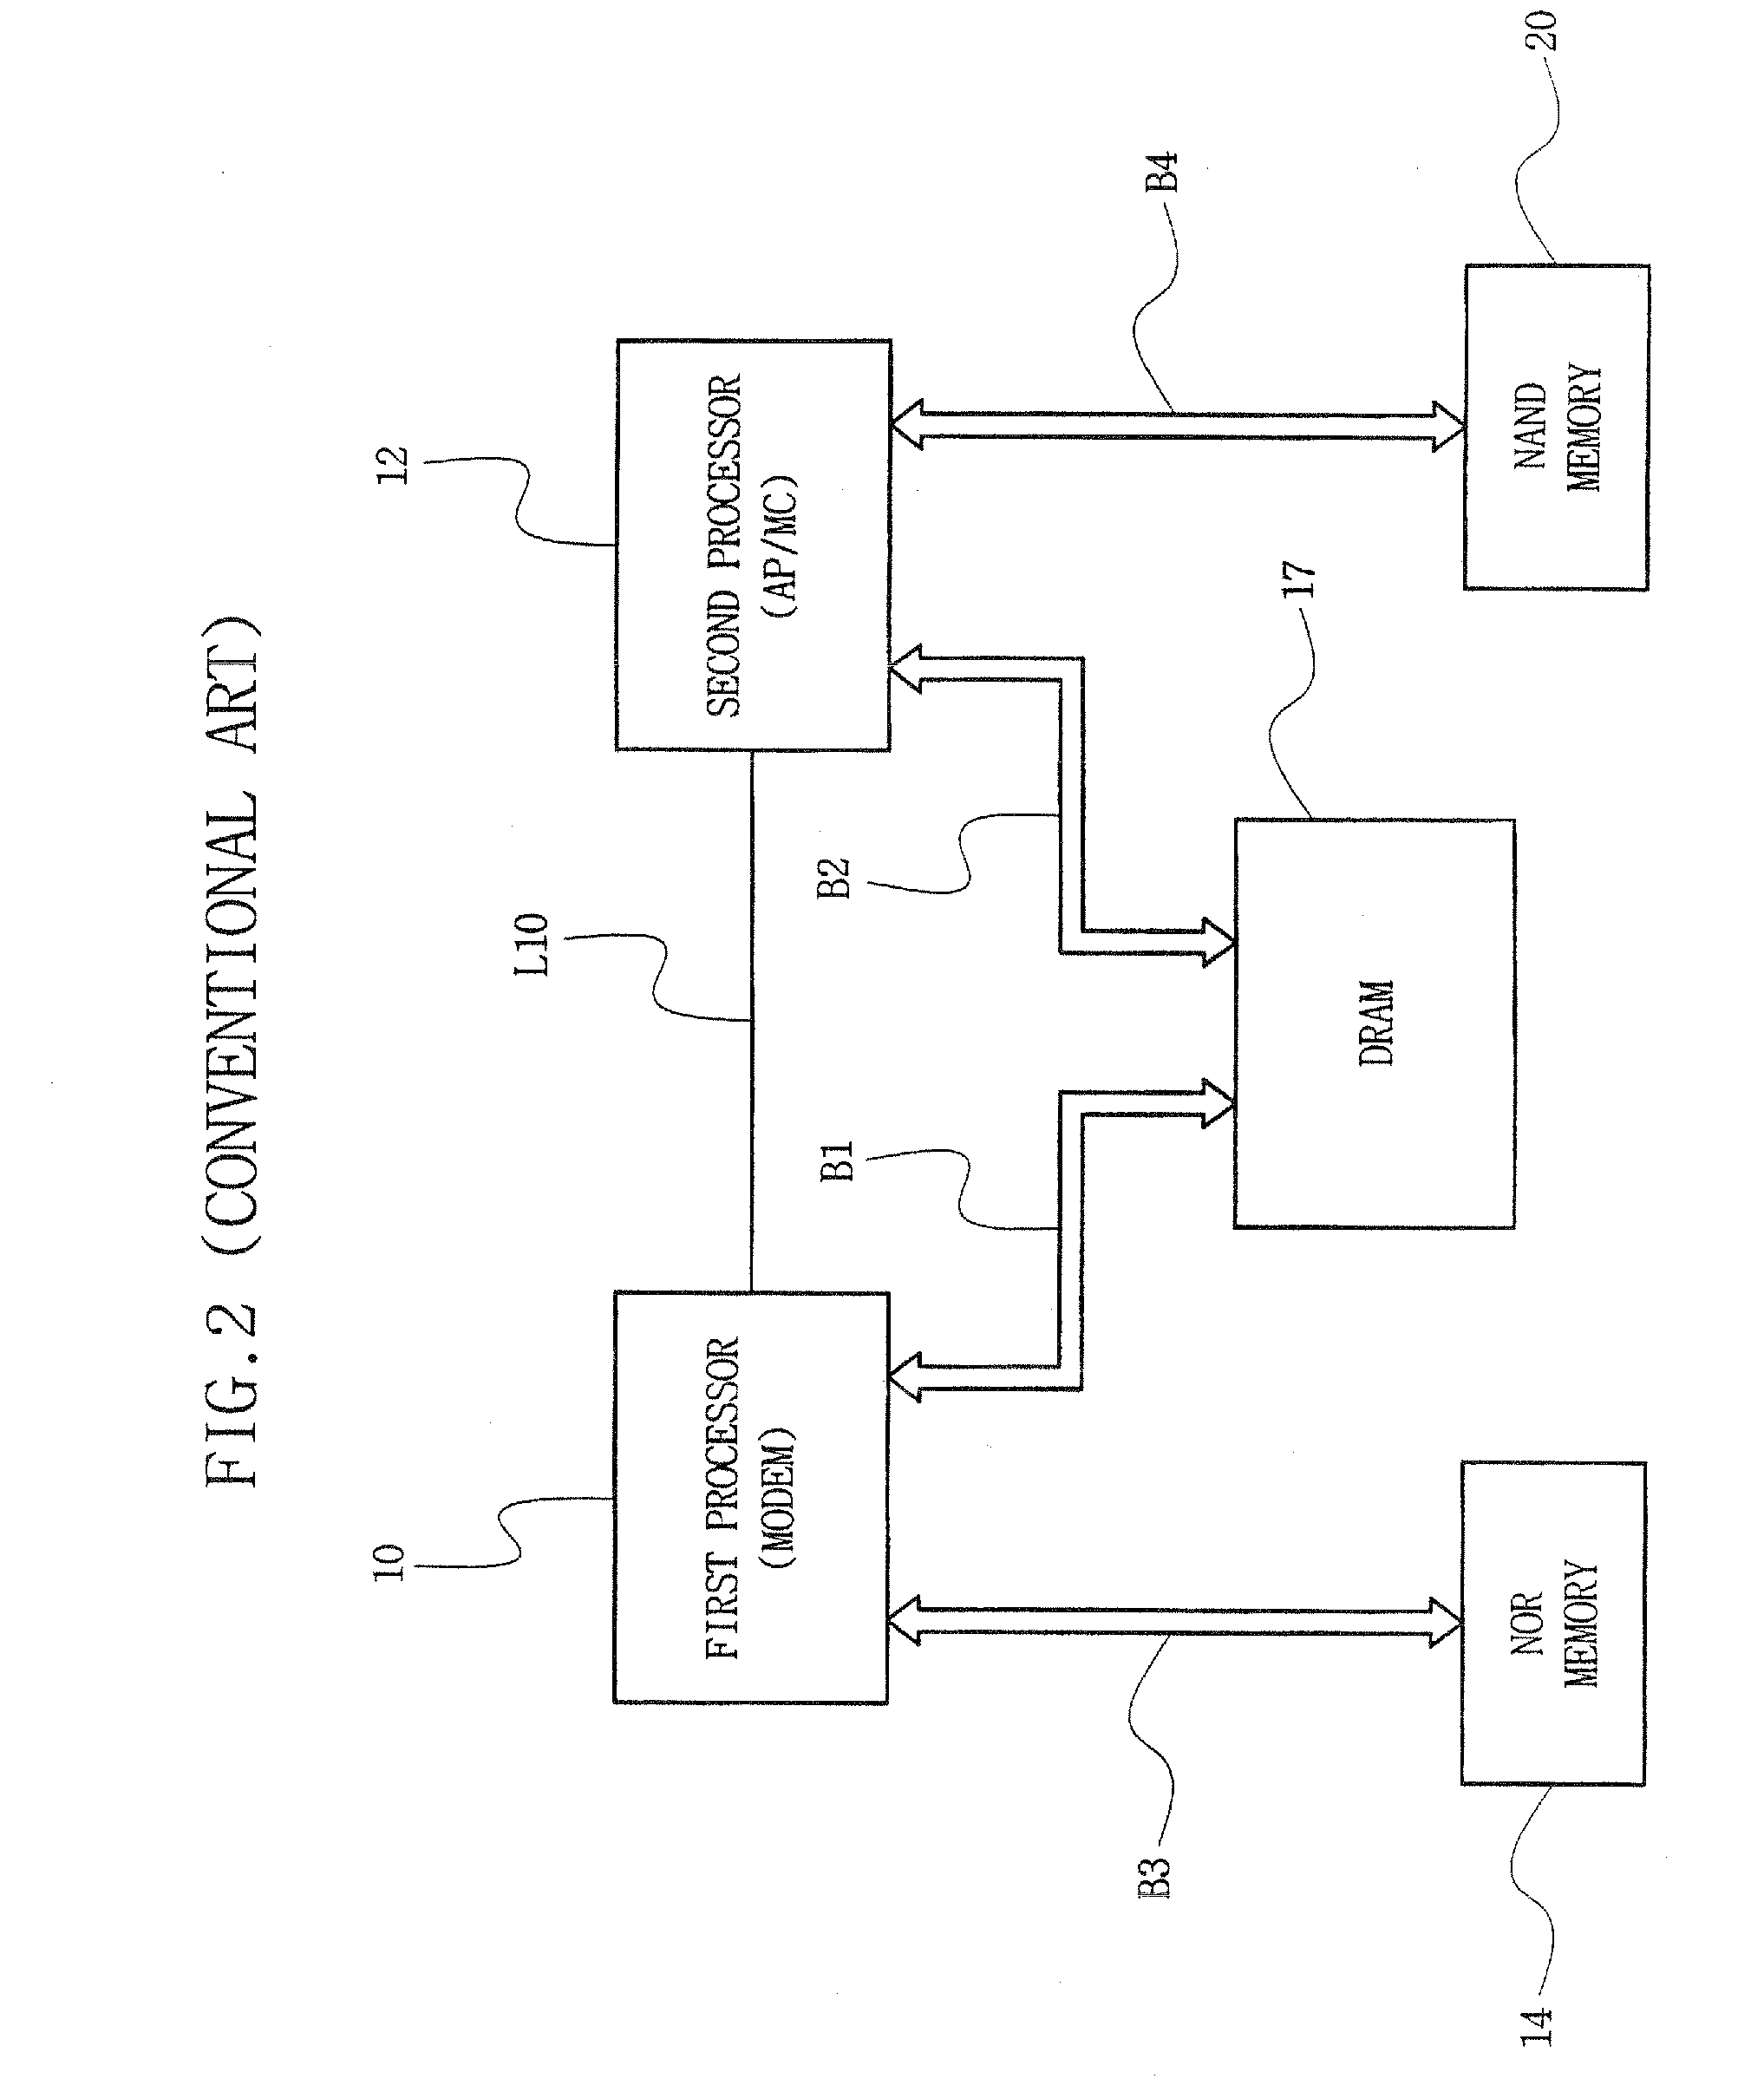 Multipath accessible semiconductor memory device with host interface between processors